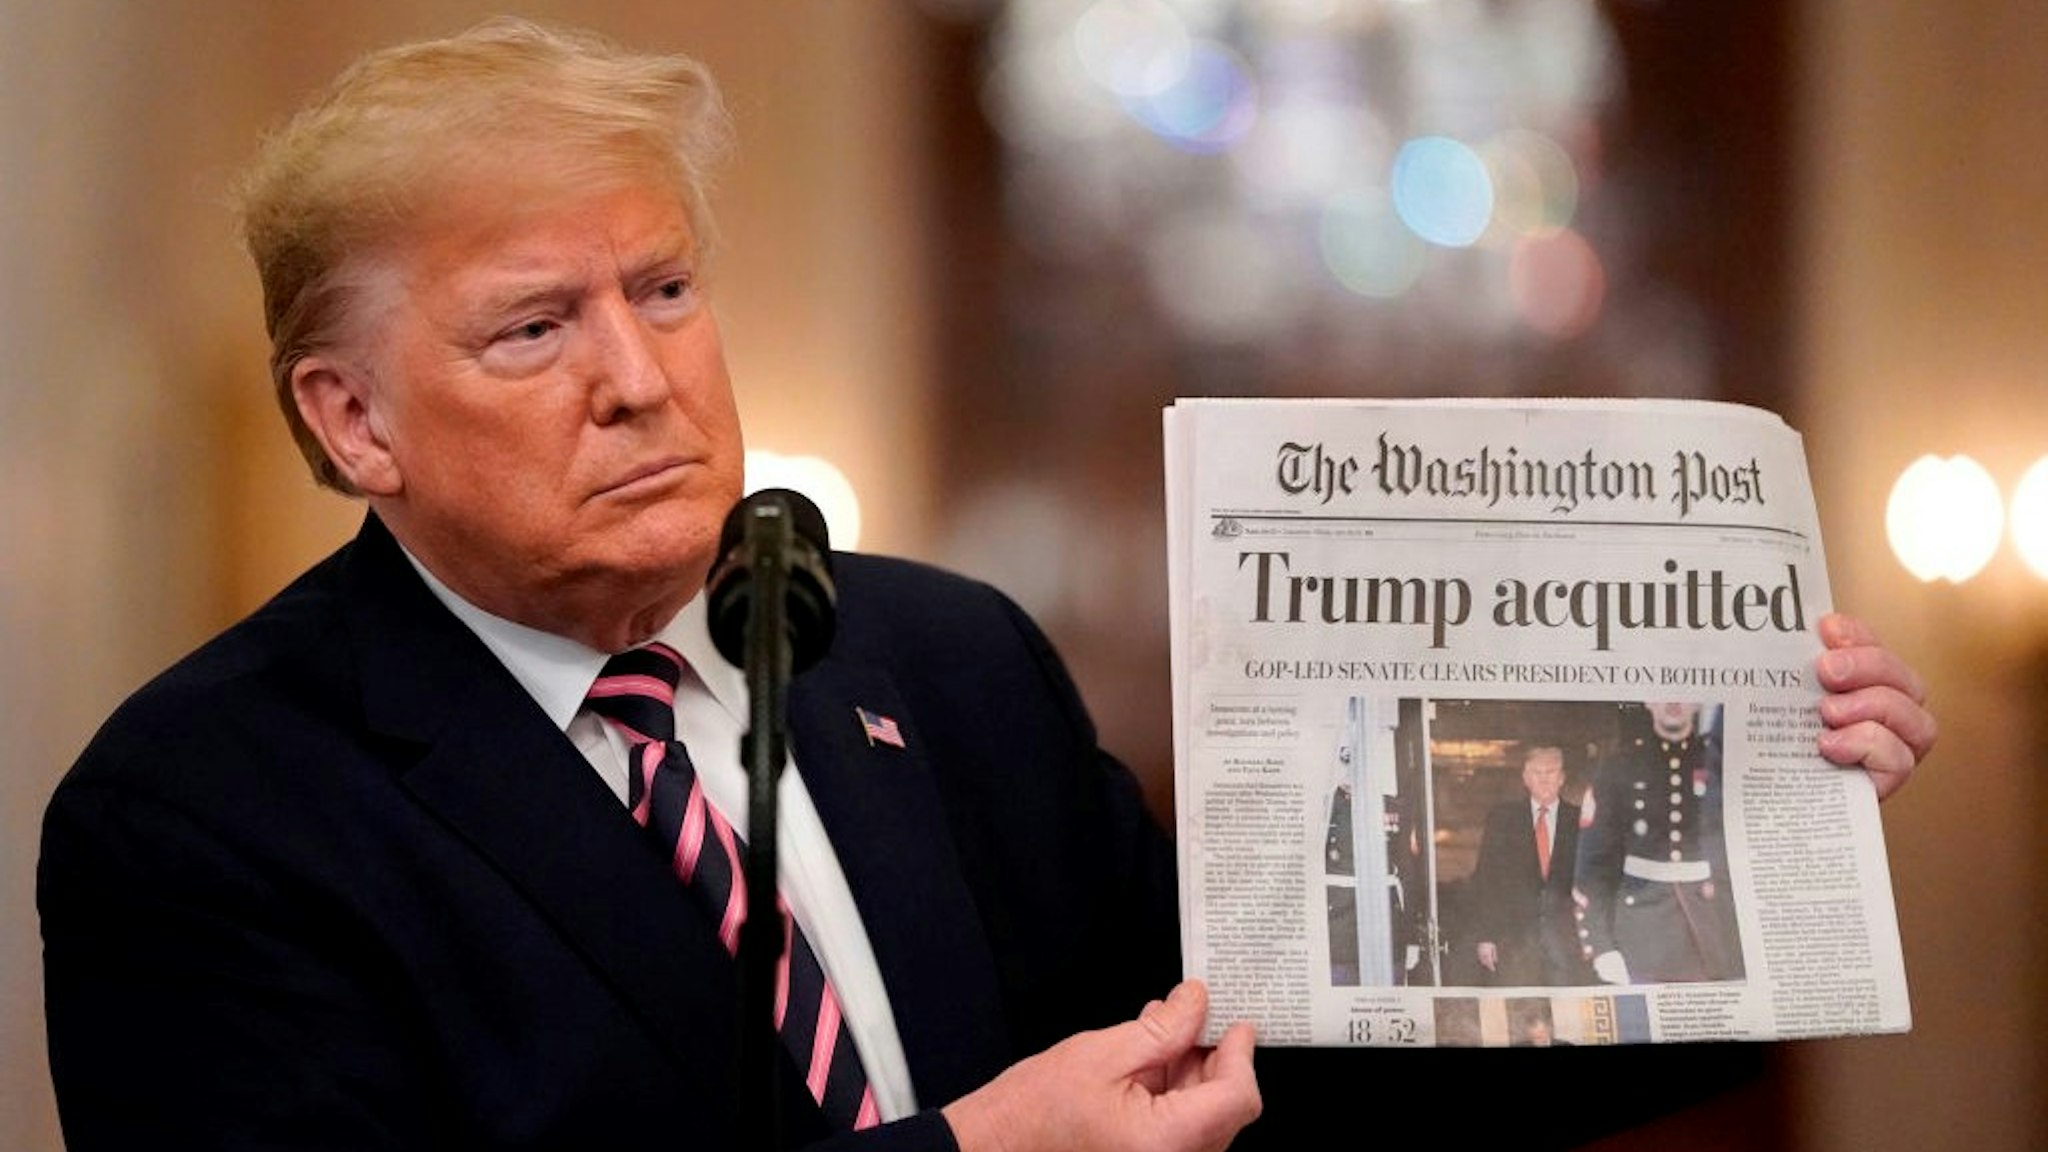 WASHINGTON, DC - FEBRUARY 06: U.S. President Donald Trump holds a copy of The Washington Post as he speaks in the East Room of the White House one day after the U.S. Senate acquitted on two articles of impeachment, ion February 6, 2020 in Washington, DC. After five months of congressional hearings and investigations about President Trump’s dealings with Ukraine, the U.S. Senate formally acquitted the president on Wednesday of charges that he abused his power and obstructed Congress. (Photo by